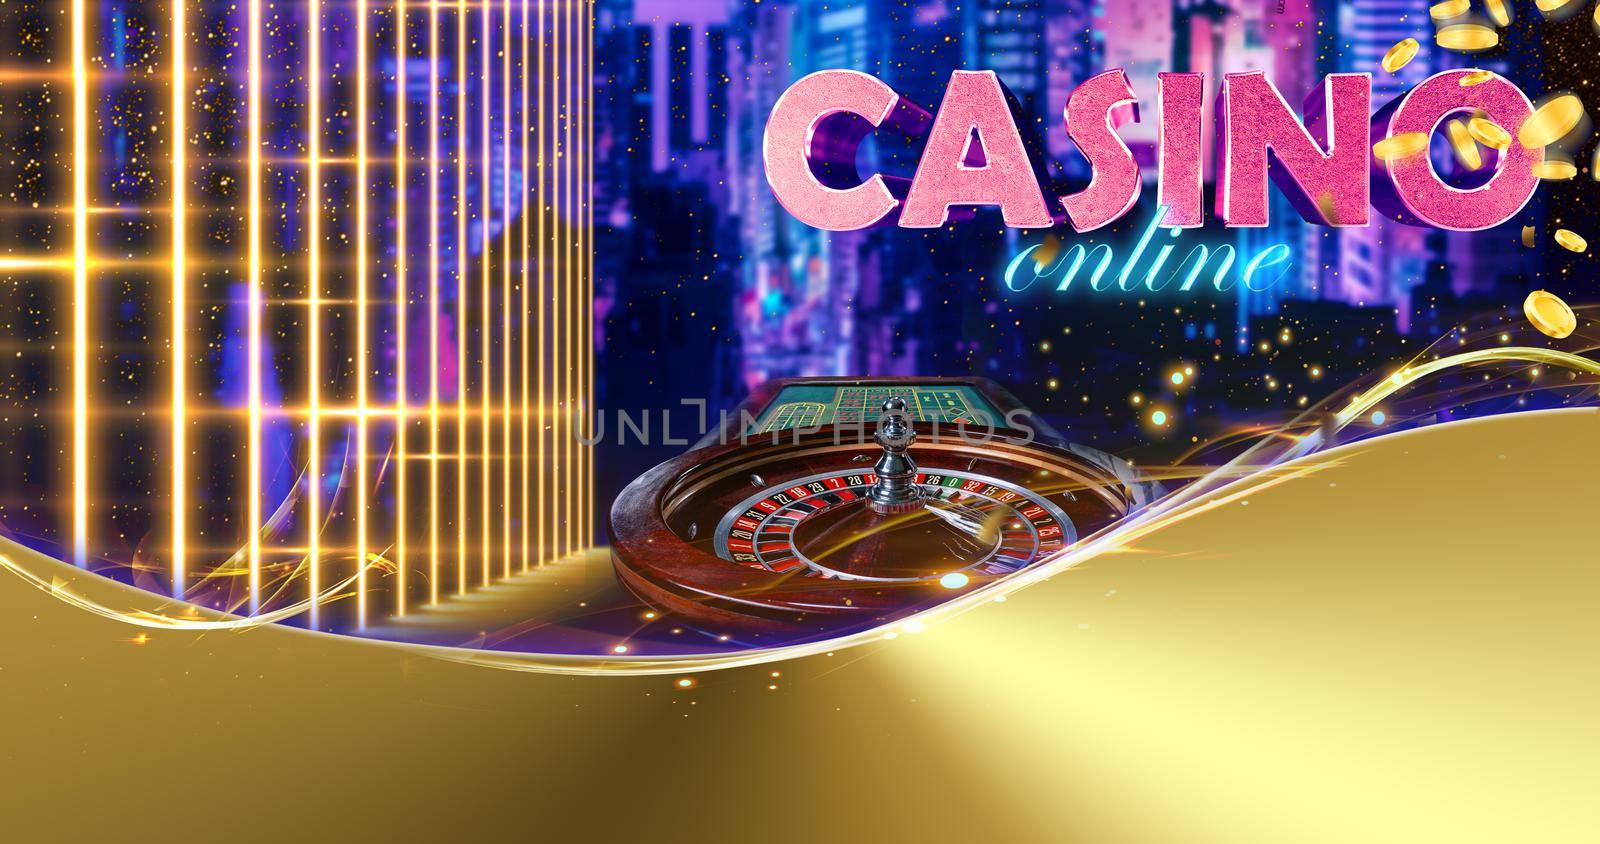 Roulette against cityscape sparkling background with neon lights and inscription casino online, falling golden coins. Copy space for your text or images. Poker